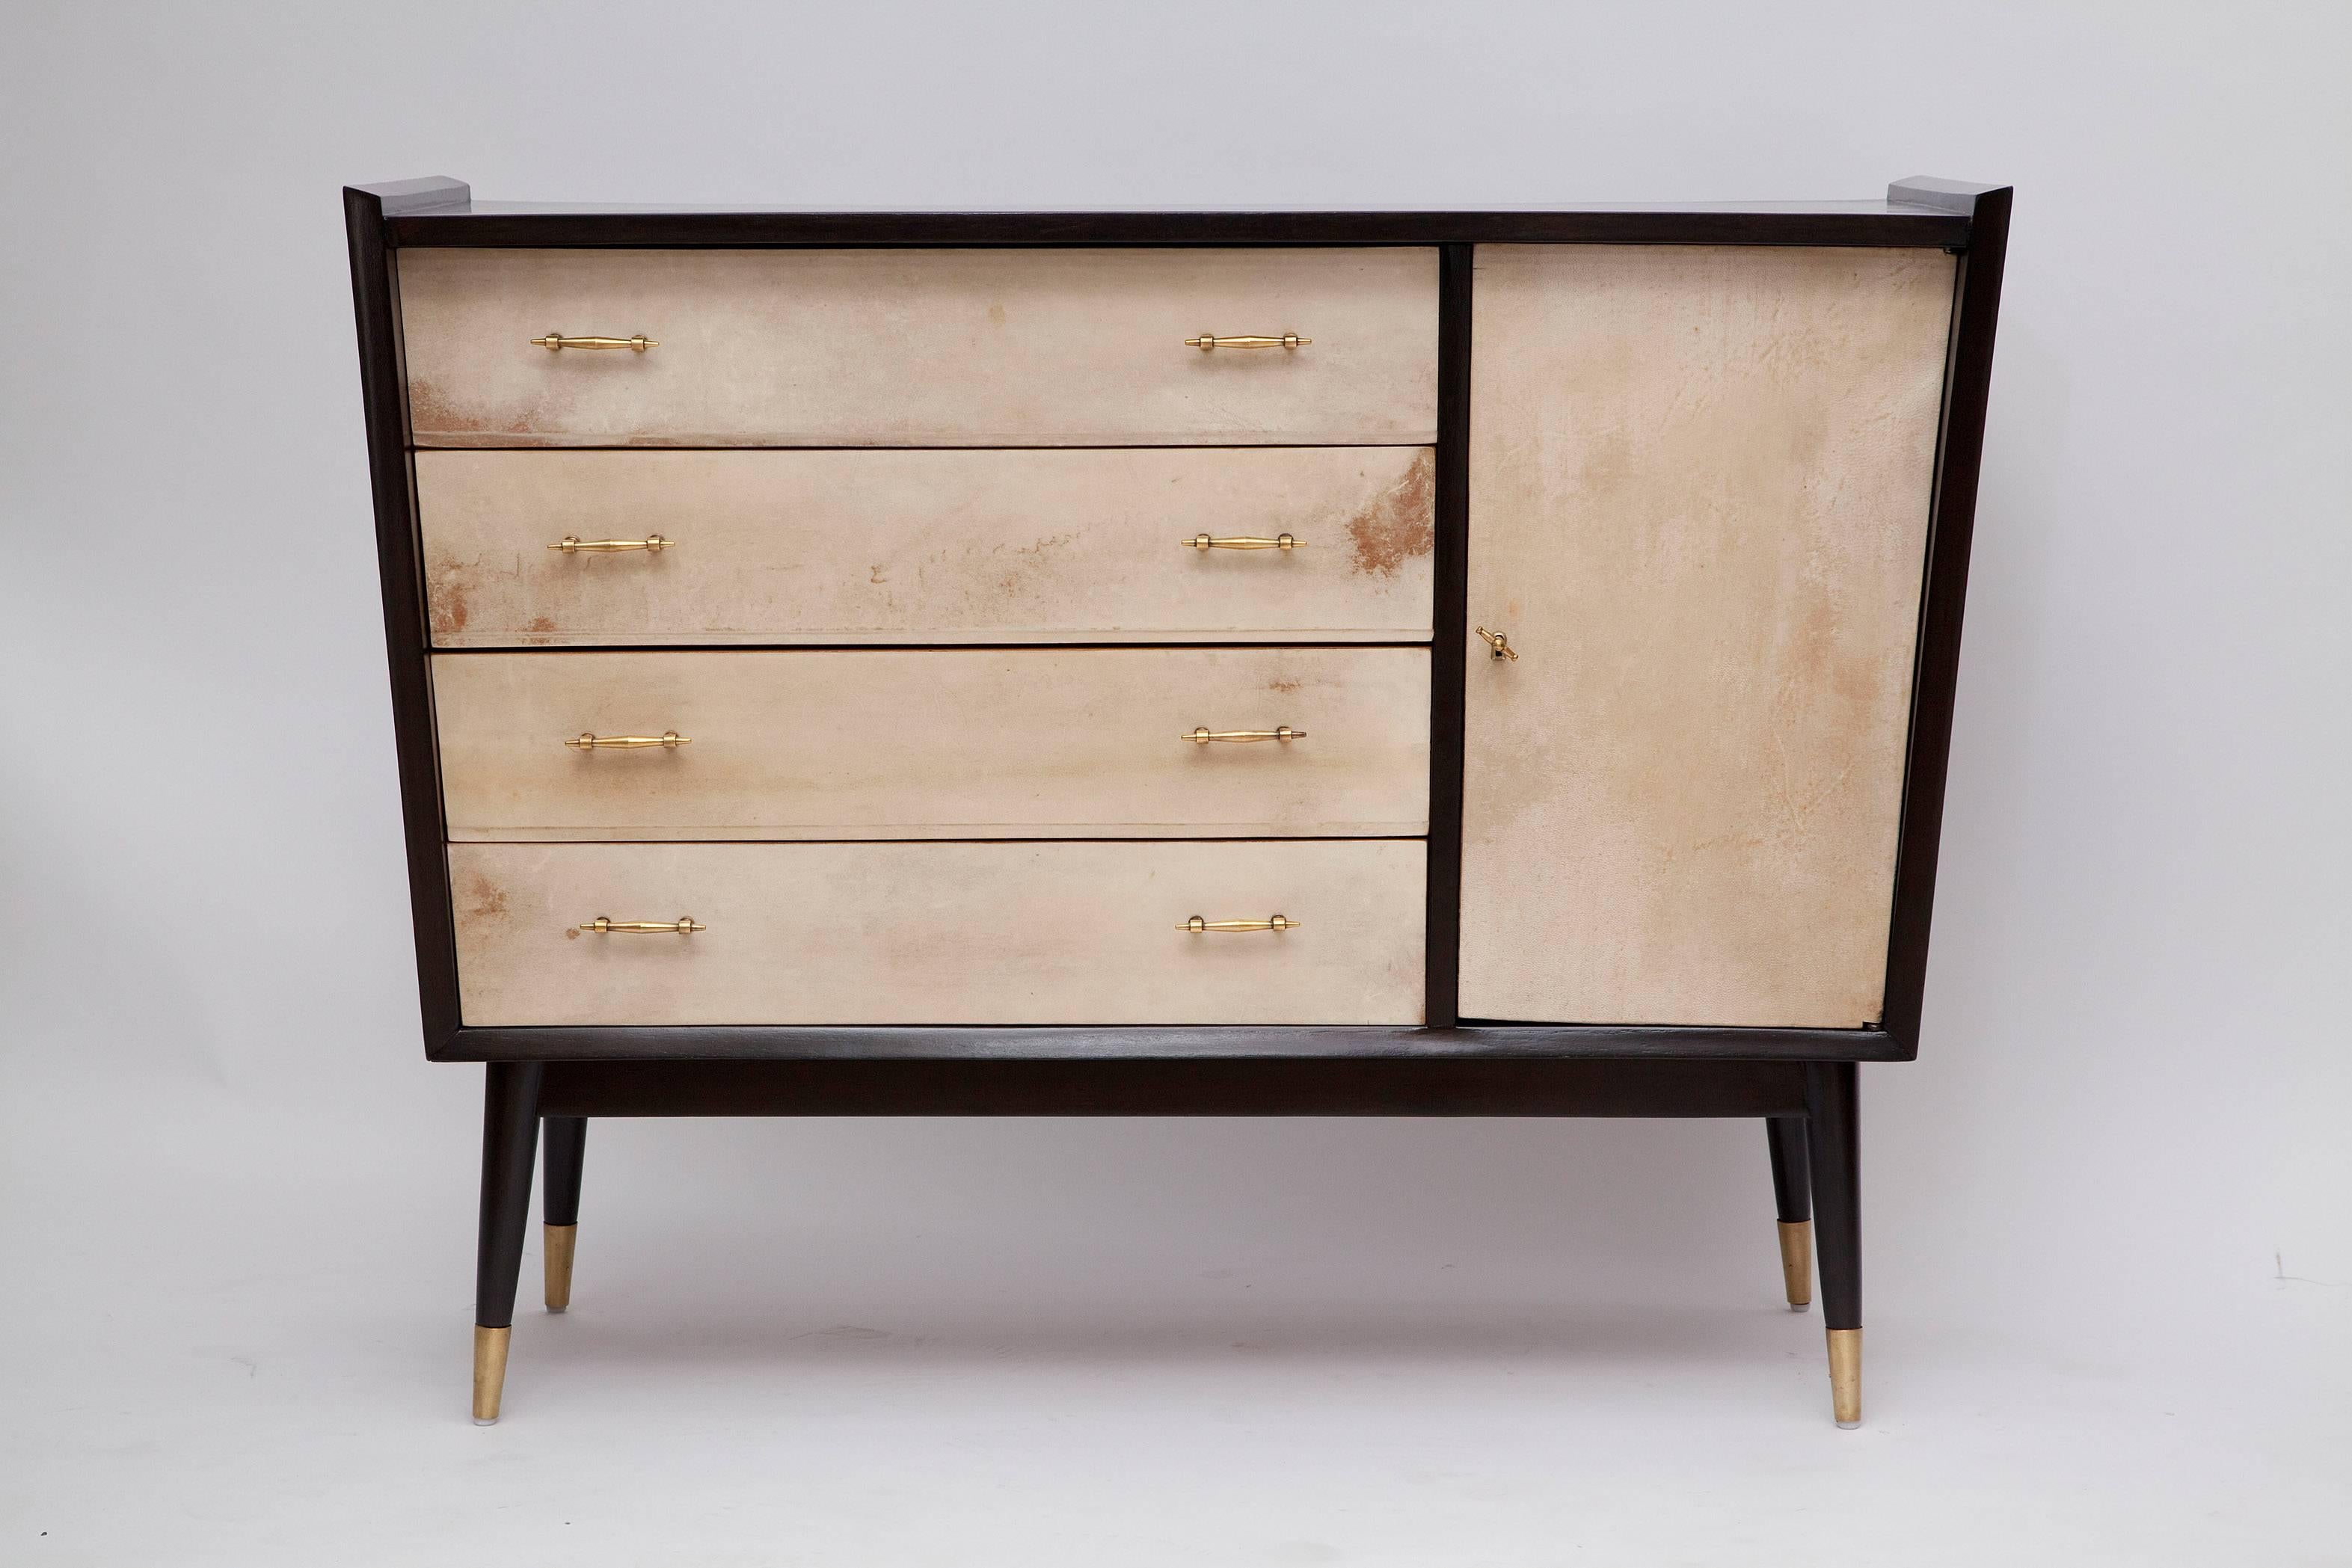 Angular 1950s modernist design teams up with interesting solid brass hardware and rich materials to make this beautifully restored French ebonized cabinet, with goatskin drawer and door fronts, an eye-catching personality piece!